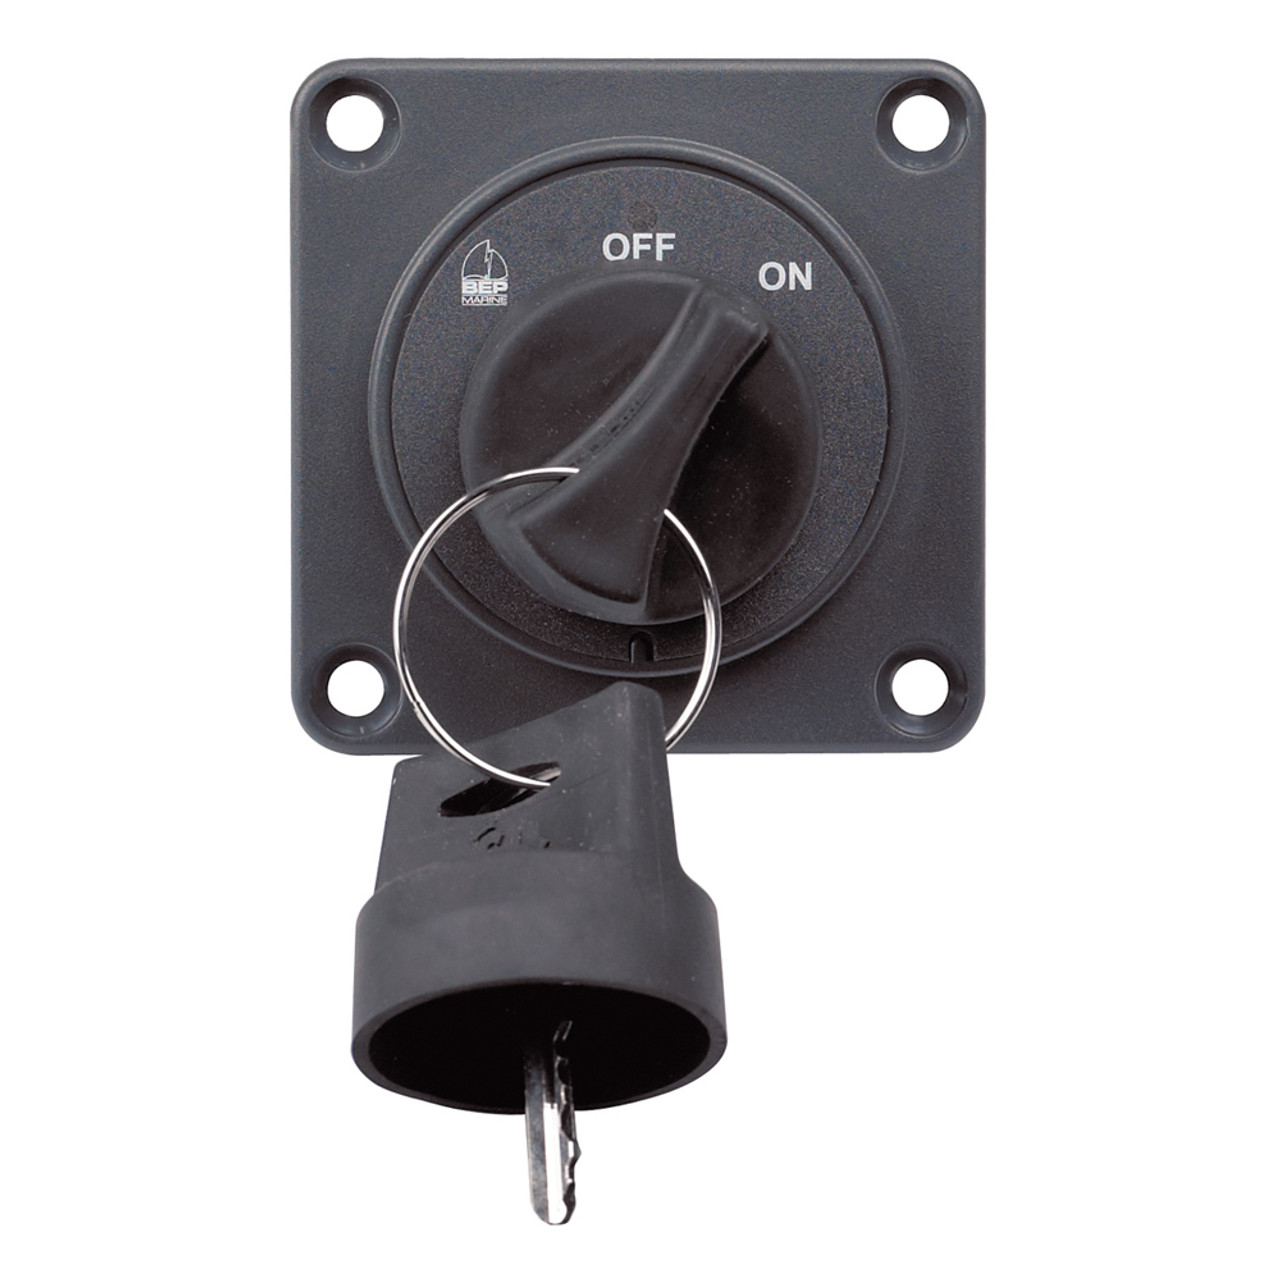 BEP Remote On/Off Key Switch for 701-MD  720-MDO Battery Switches P/N  80-724-0006-00 ProPride Hitch